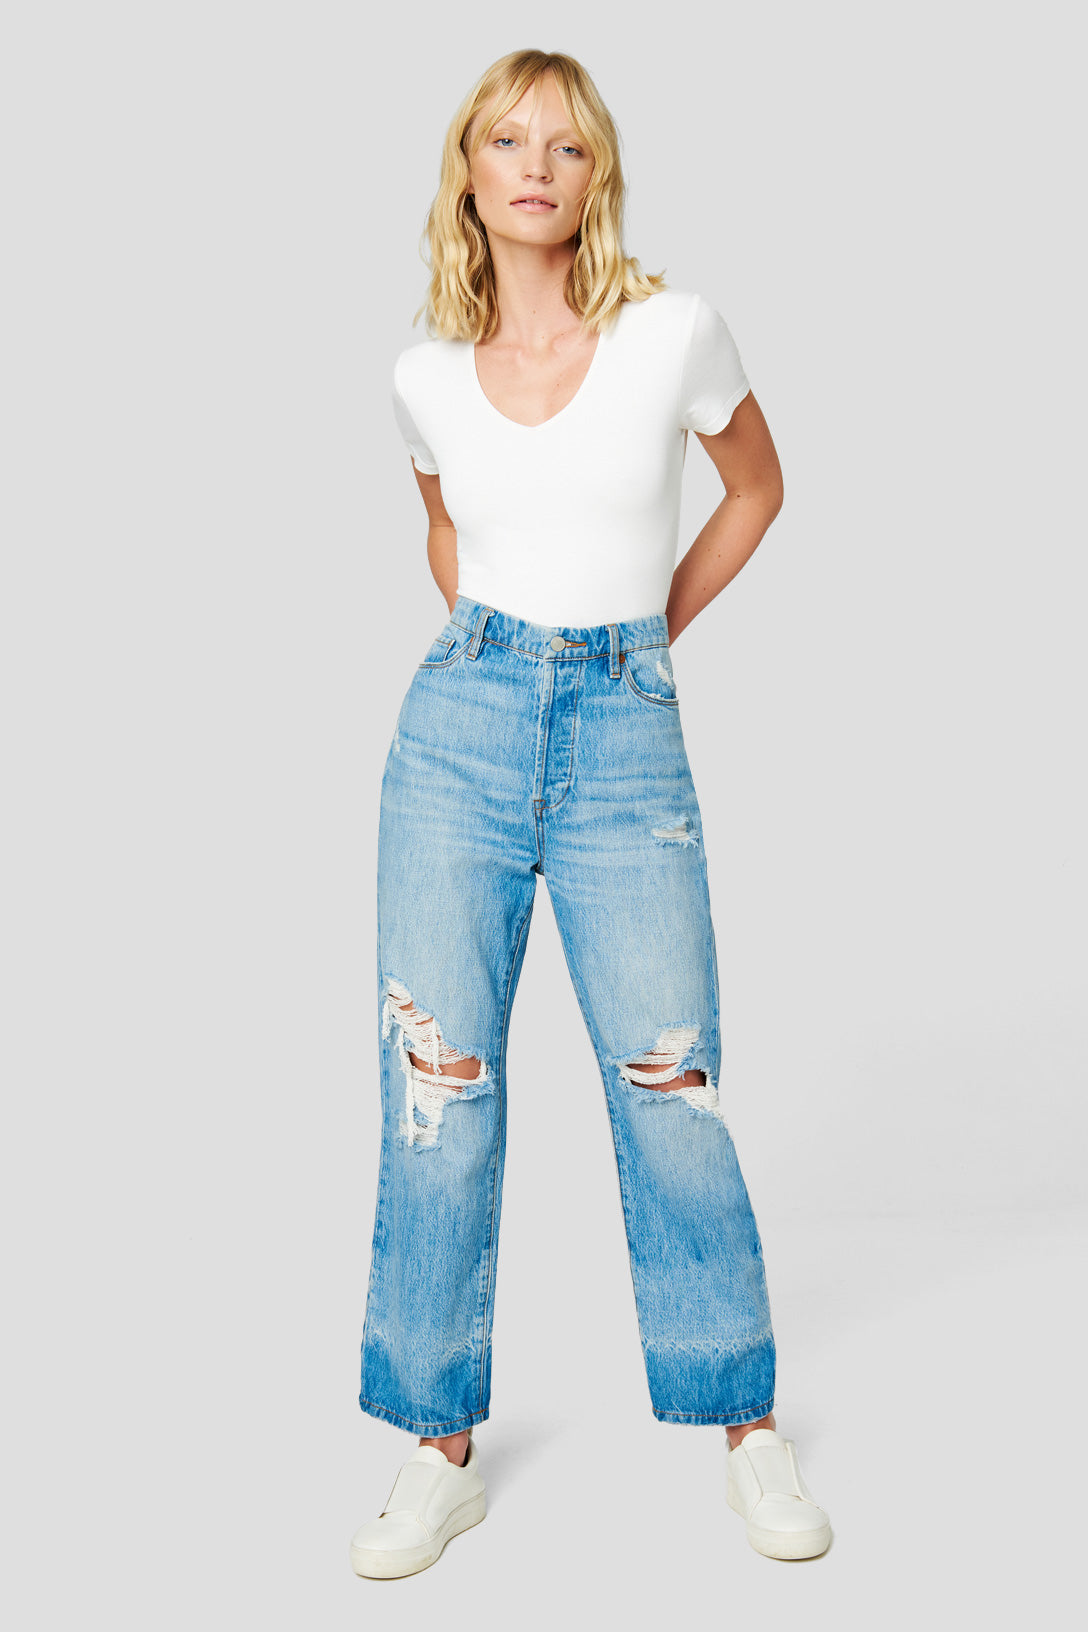 The Baxter In Personal Best Jean